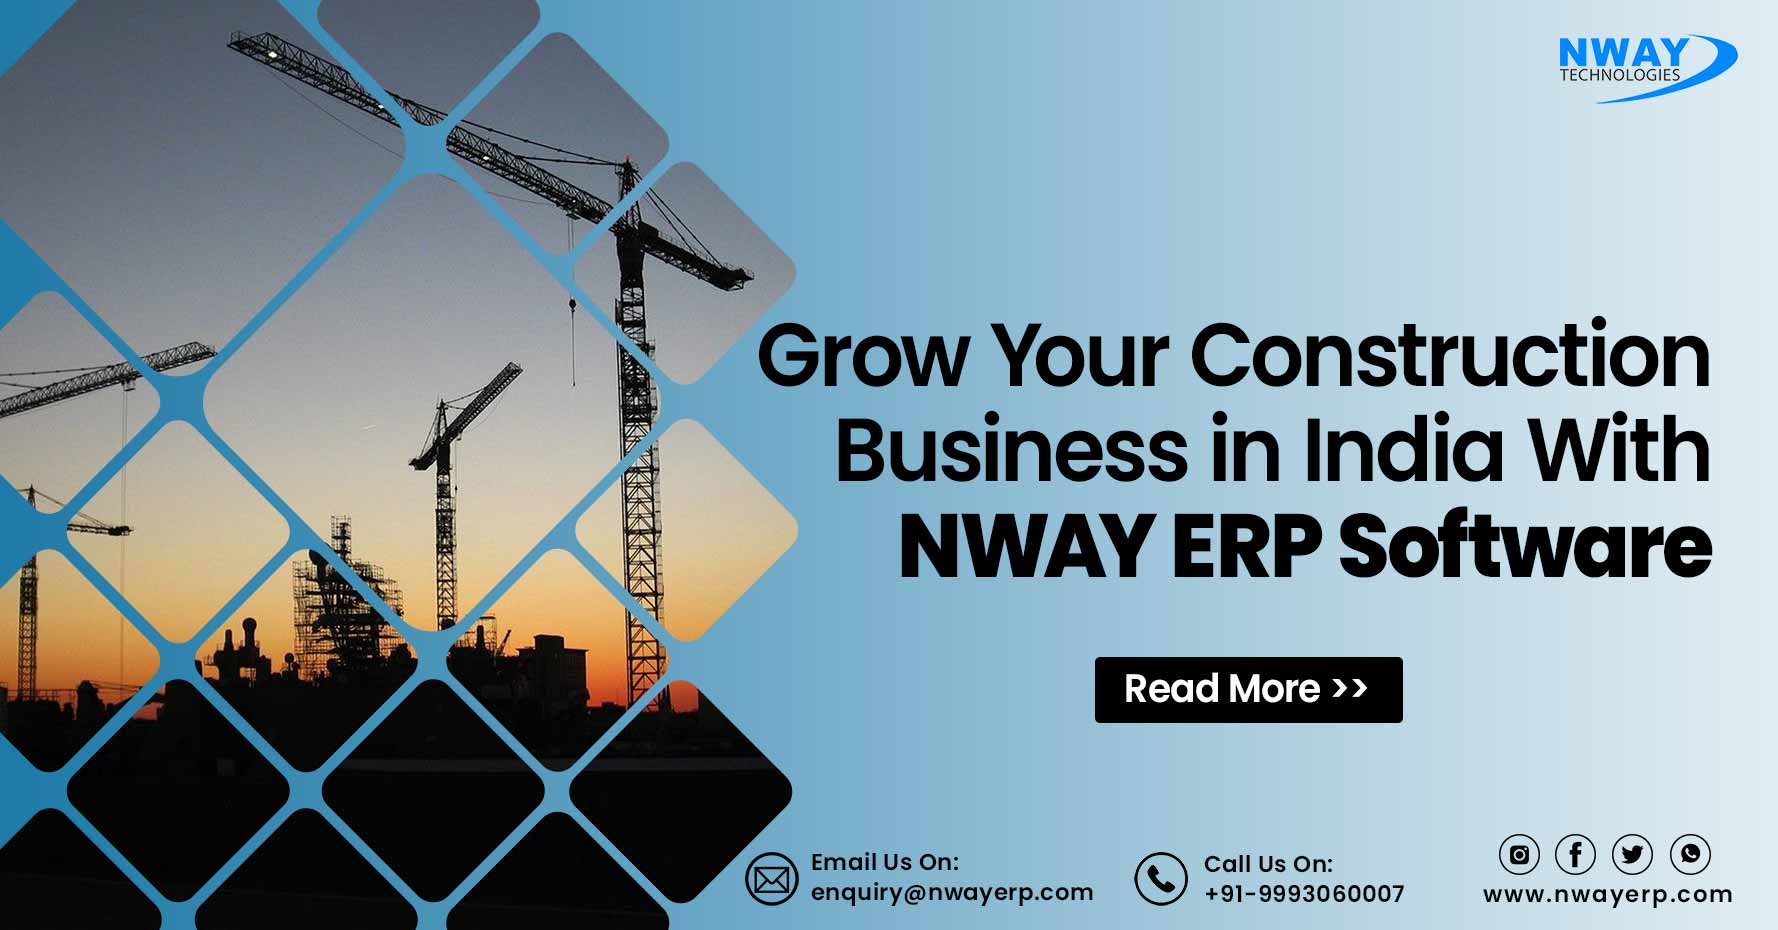 Grow your Construction Business in India with NWAY ERP Software